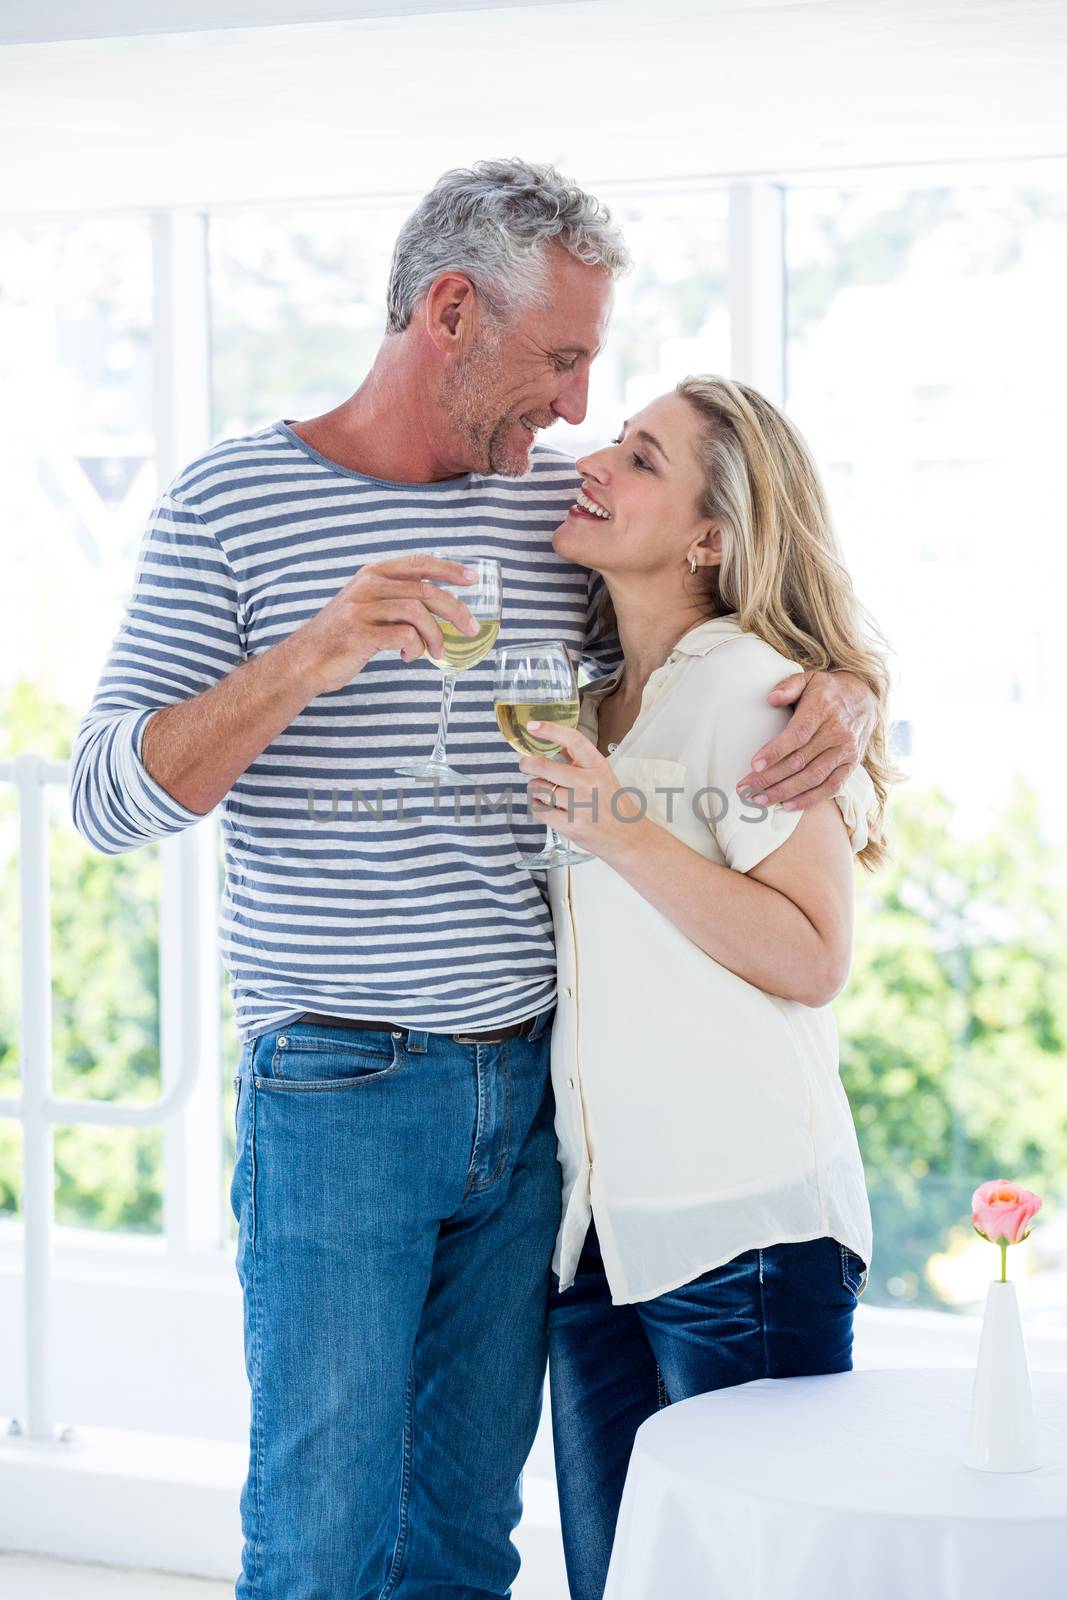 Romantic mature couple with wine glasses while sitting at restaurant